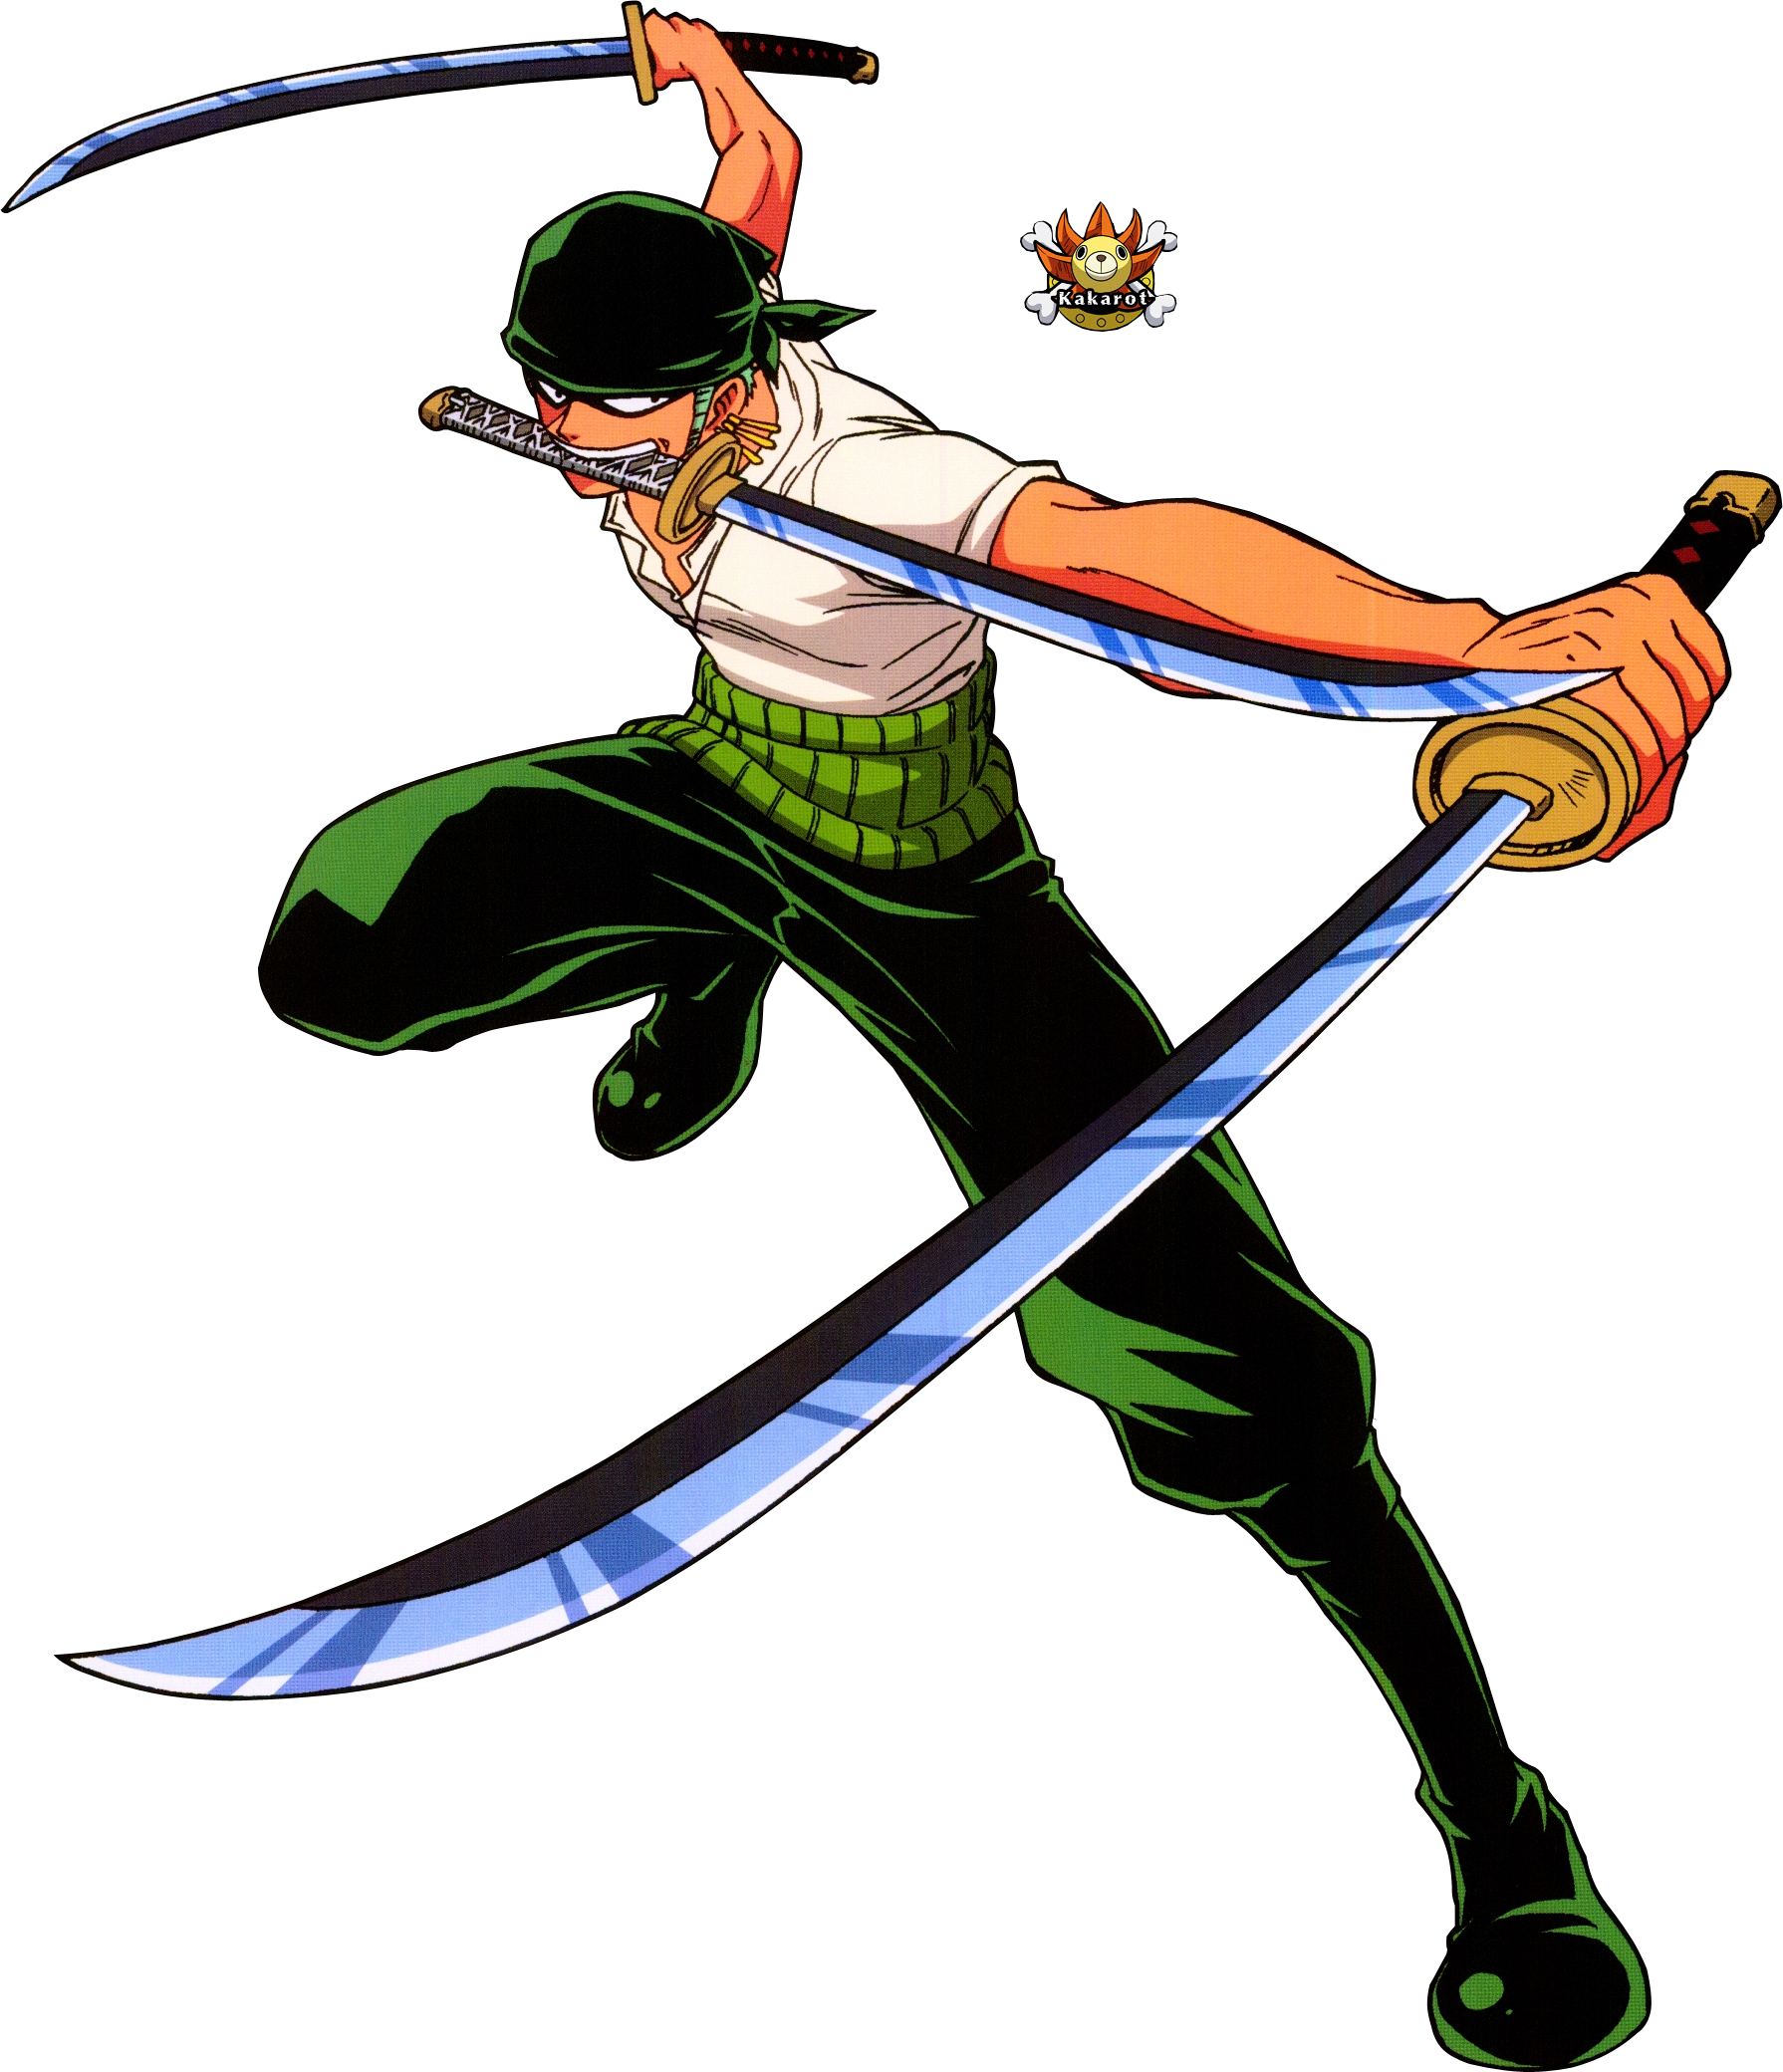 Image One Piece Zoro Png Picpng Vs Battles Wiki Fandom Powered